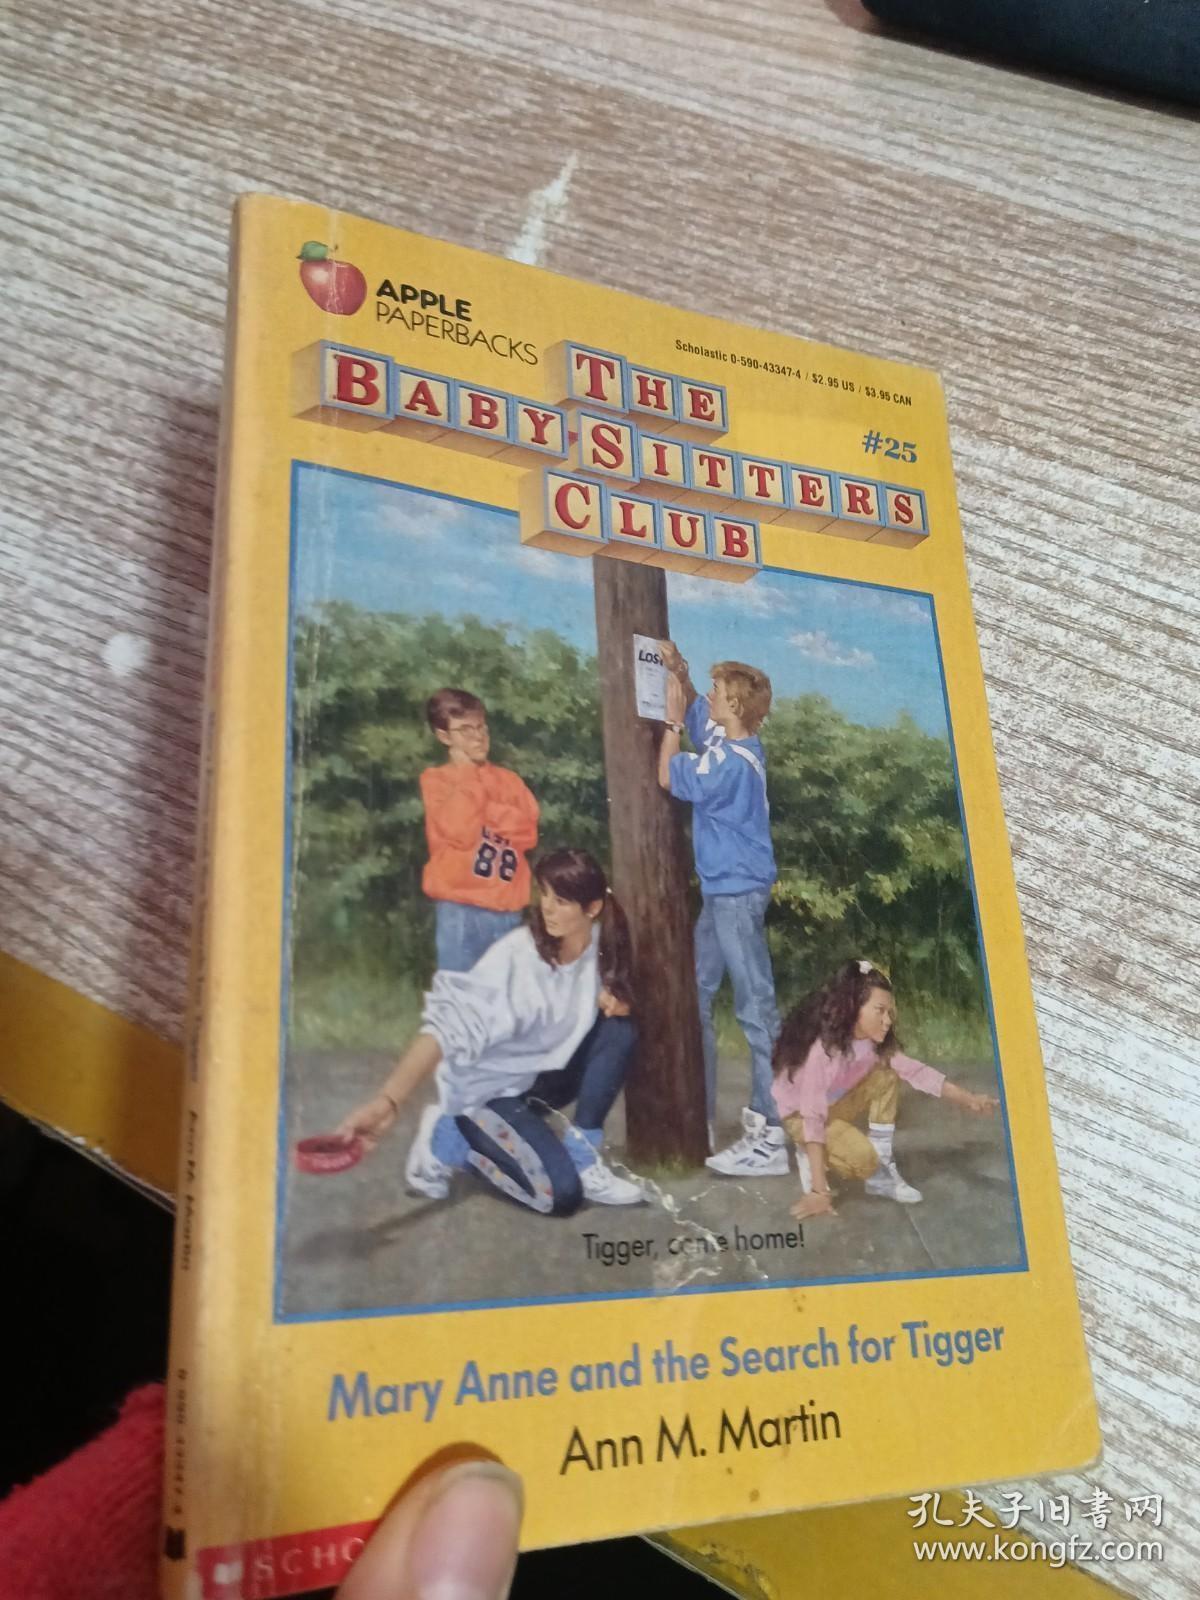 The Babysitters Club #25 mary anne and the search for tigger